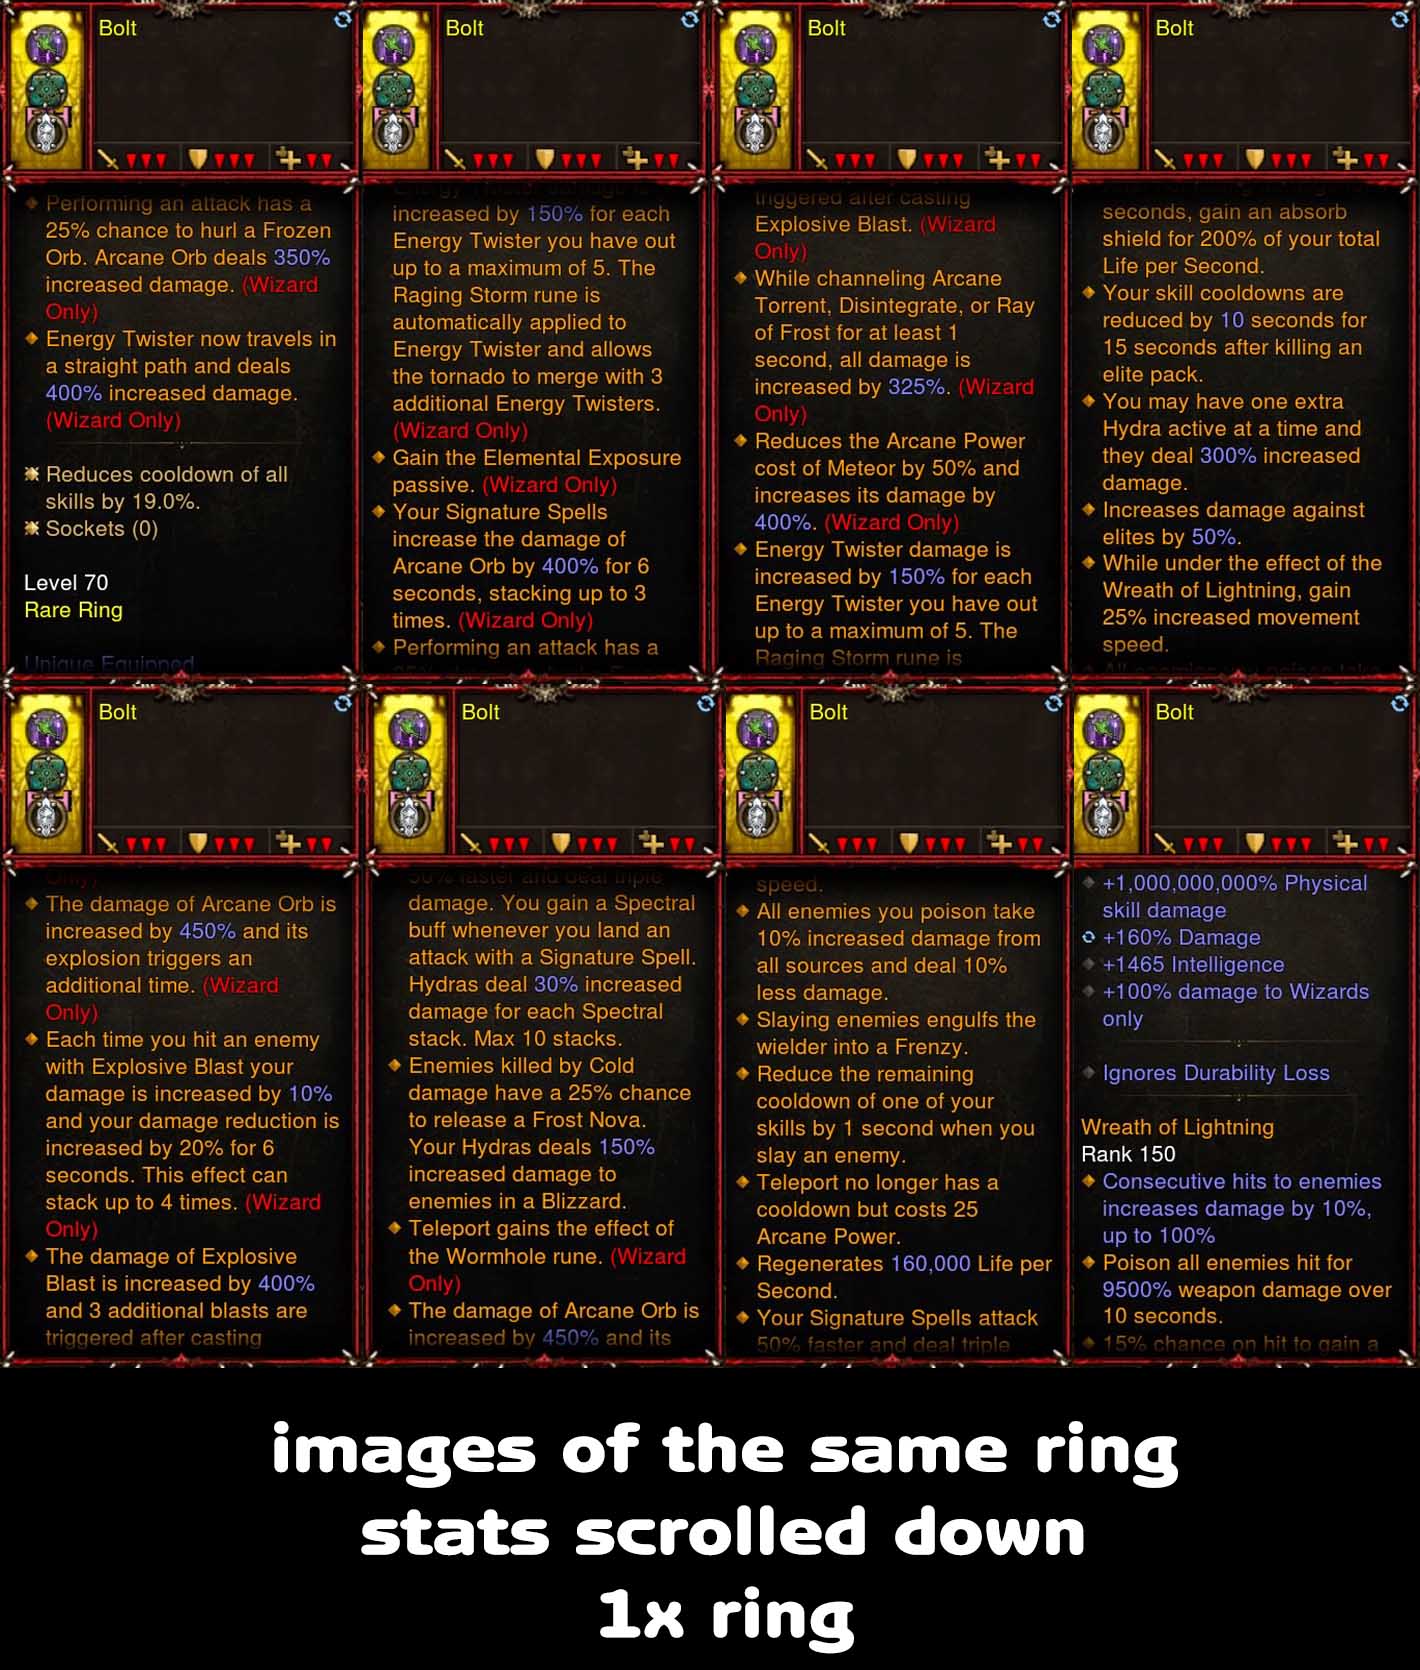 [Primal-Ethereal Infused] Legendary Affixes 100000000% Ring for Wizard Bolt Diablo 3 Mods ROS Seasonal and Non Seasonal Save Mod - Modded Items and Gear - Hacks - Cheats - Trainers for Playstation 4 - Playstation 5 - Nintendo Switch - Xbox One